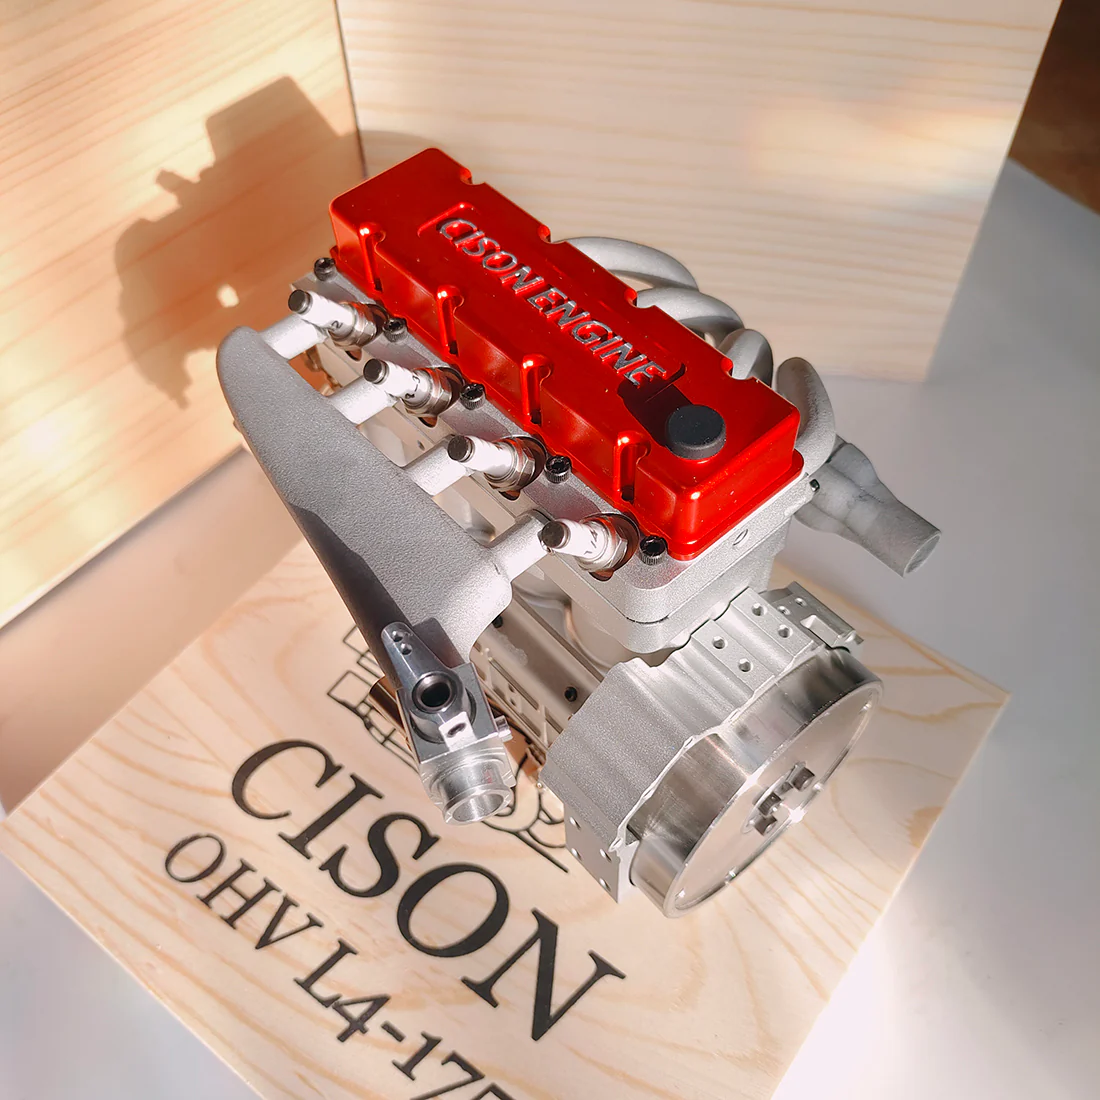 CISON L4-175 17.5cc Miniature OHV Four-cylinder Four-Stroke Engine Kits that Runs on Gas for RC Cars Ships 2